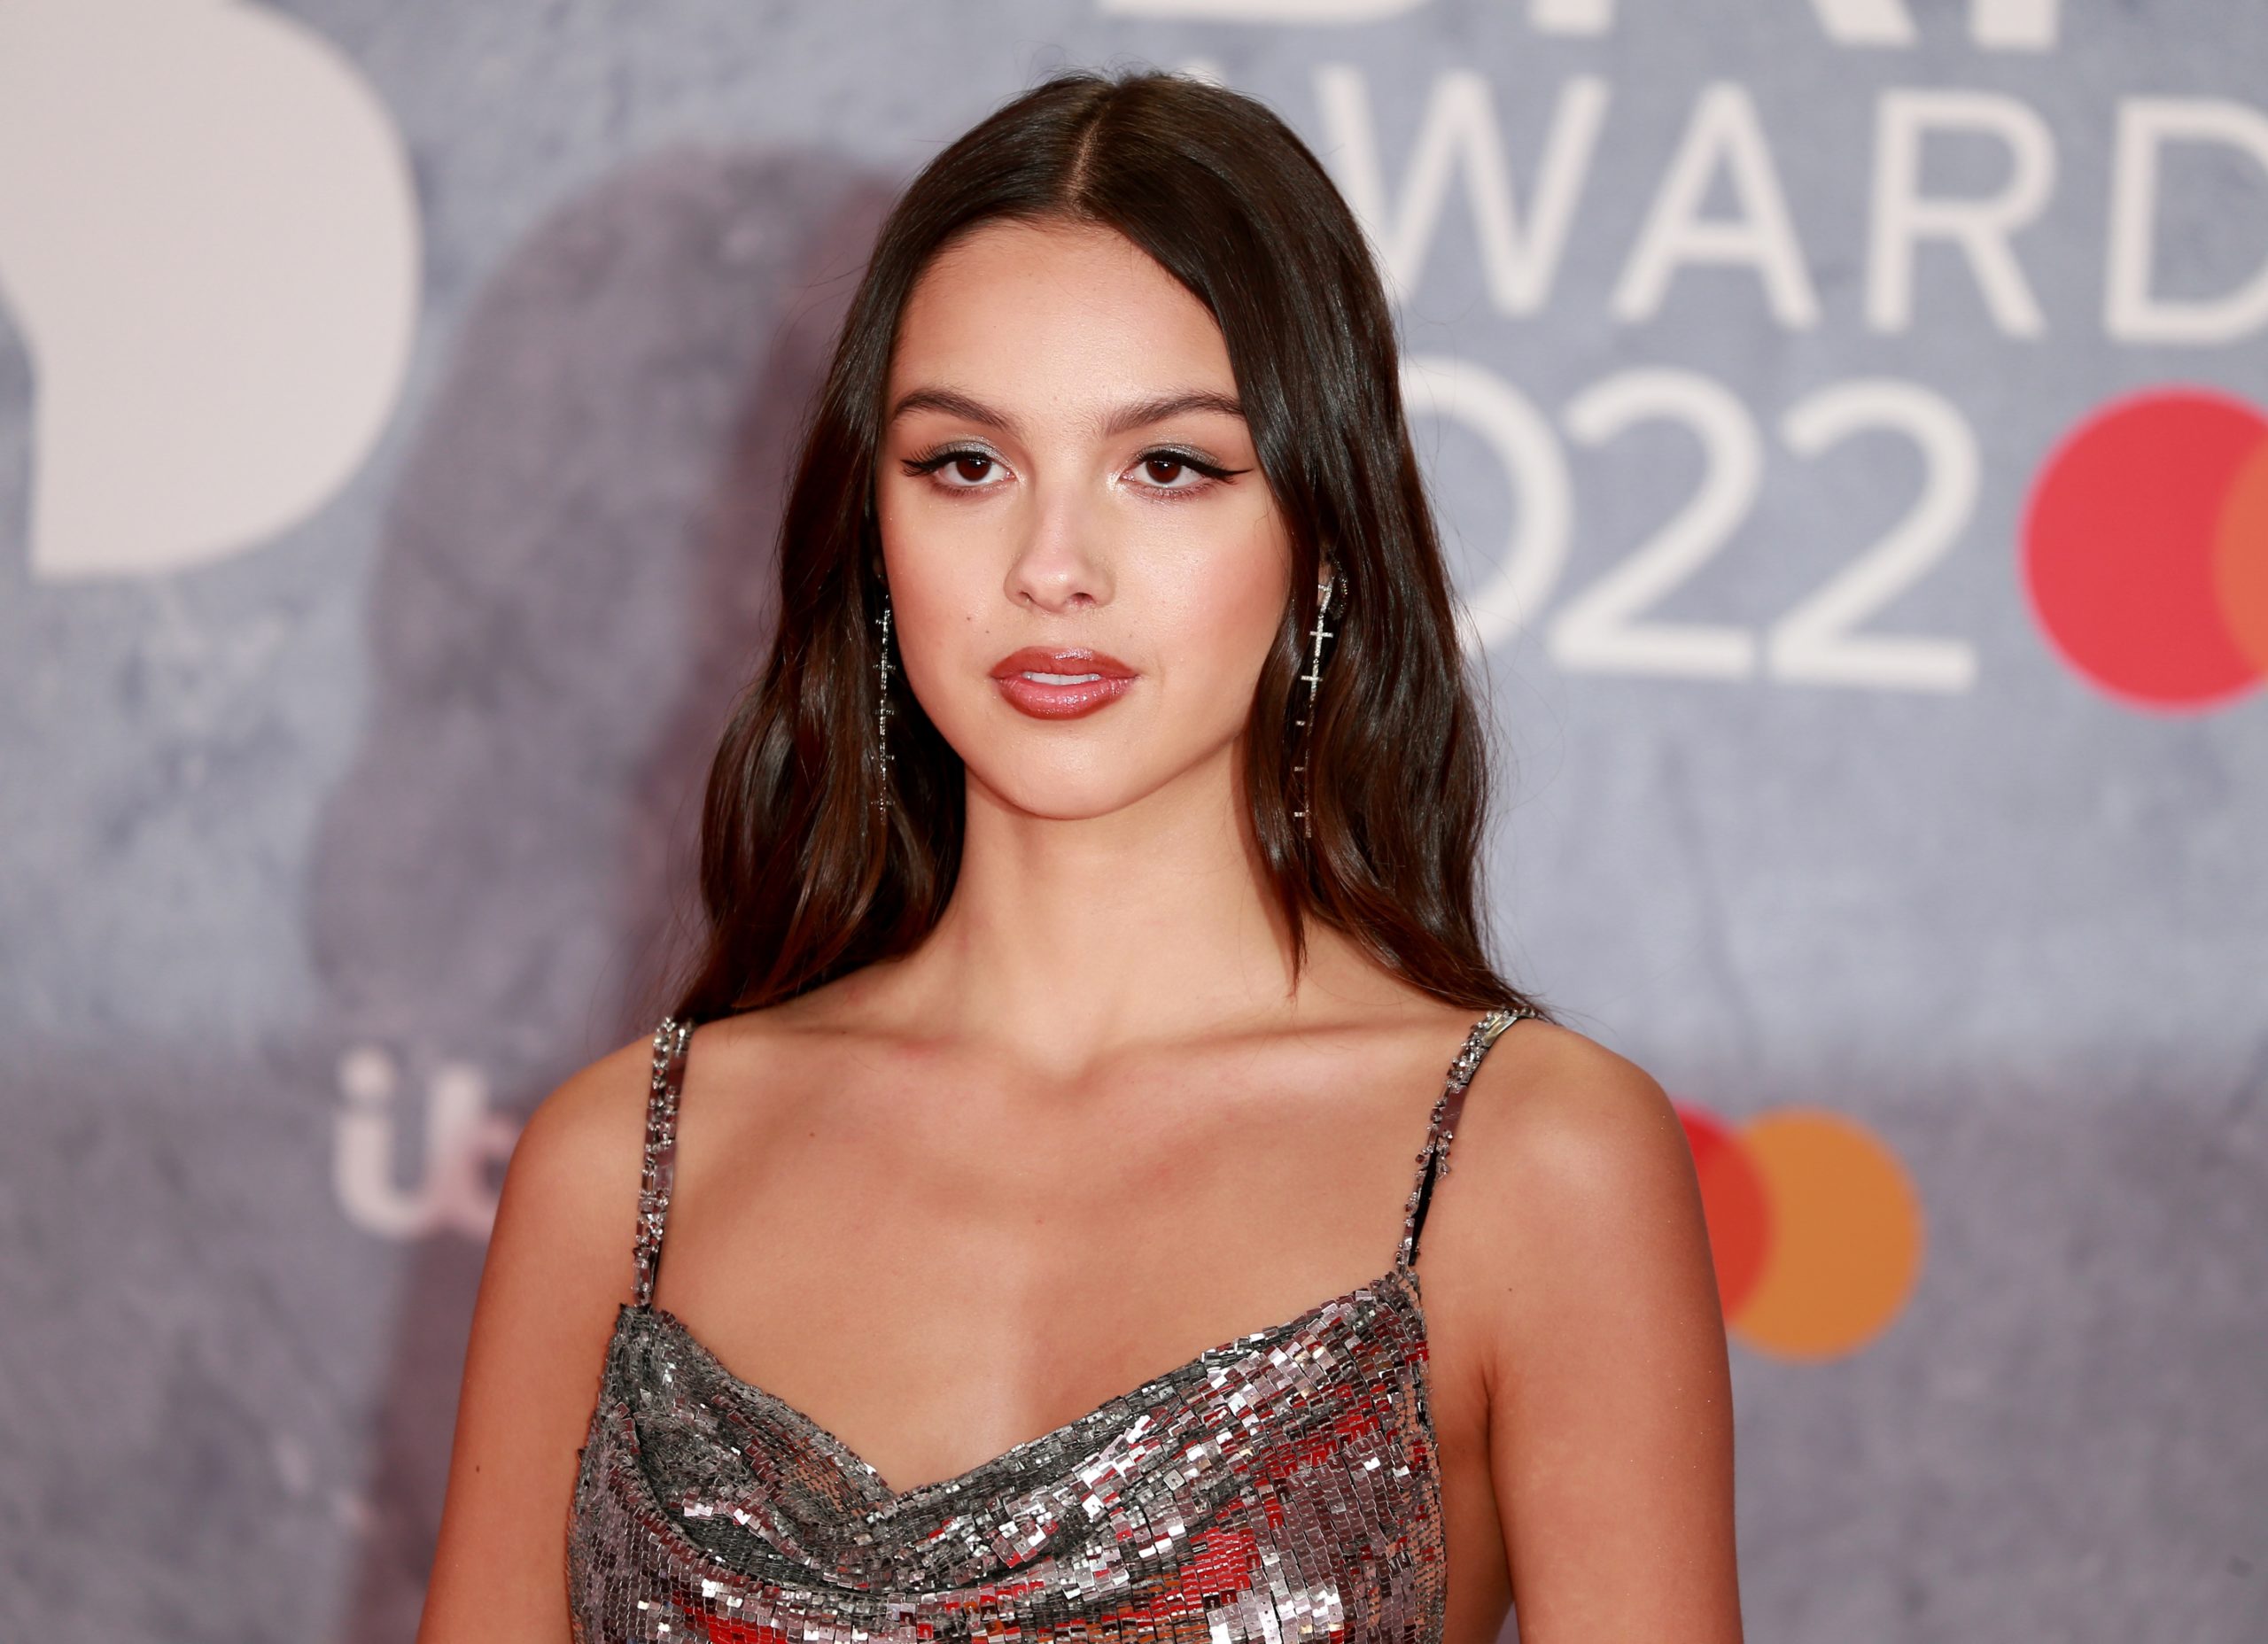 Taking on the title as the official 2022 'Woman of the year', Olivia Rodrigo continues being a fashion icon in her newly shared photos. Her most recent Instagram post features the pop sensation in a stunning green coat and fun hair accessories.